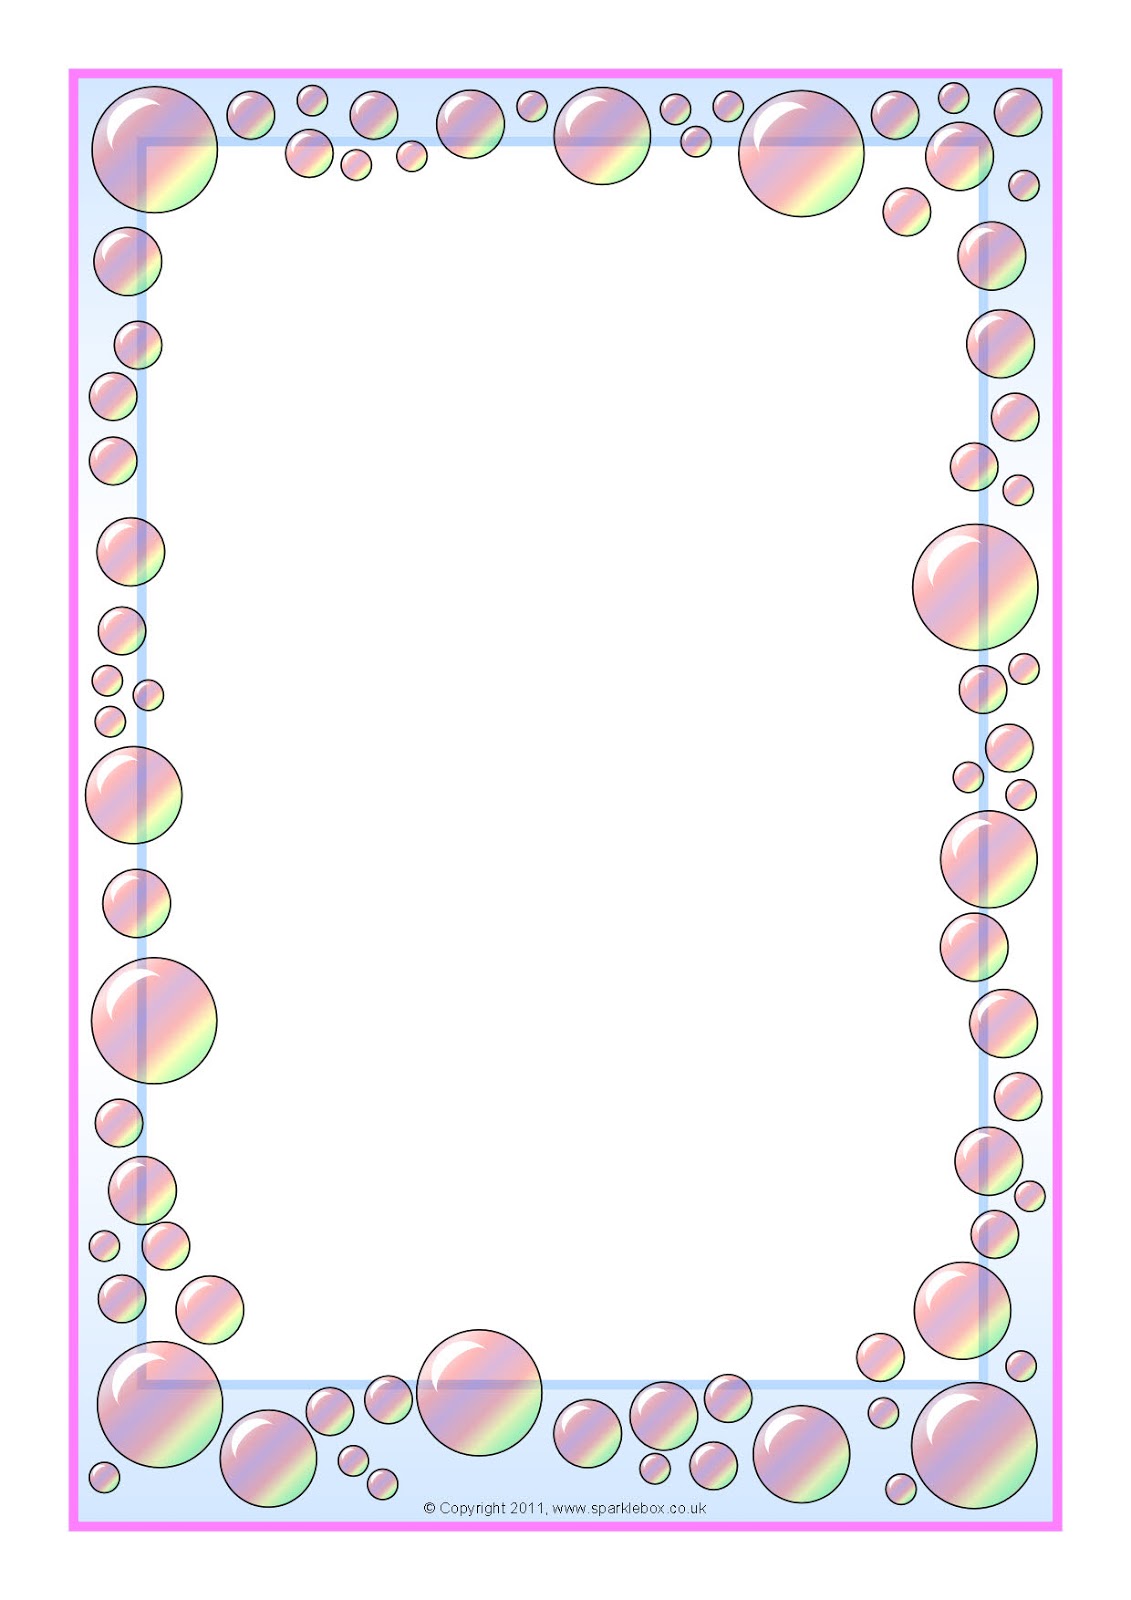 Simple Border Designs for Paper